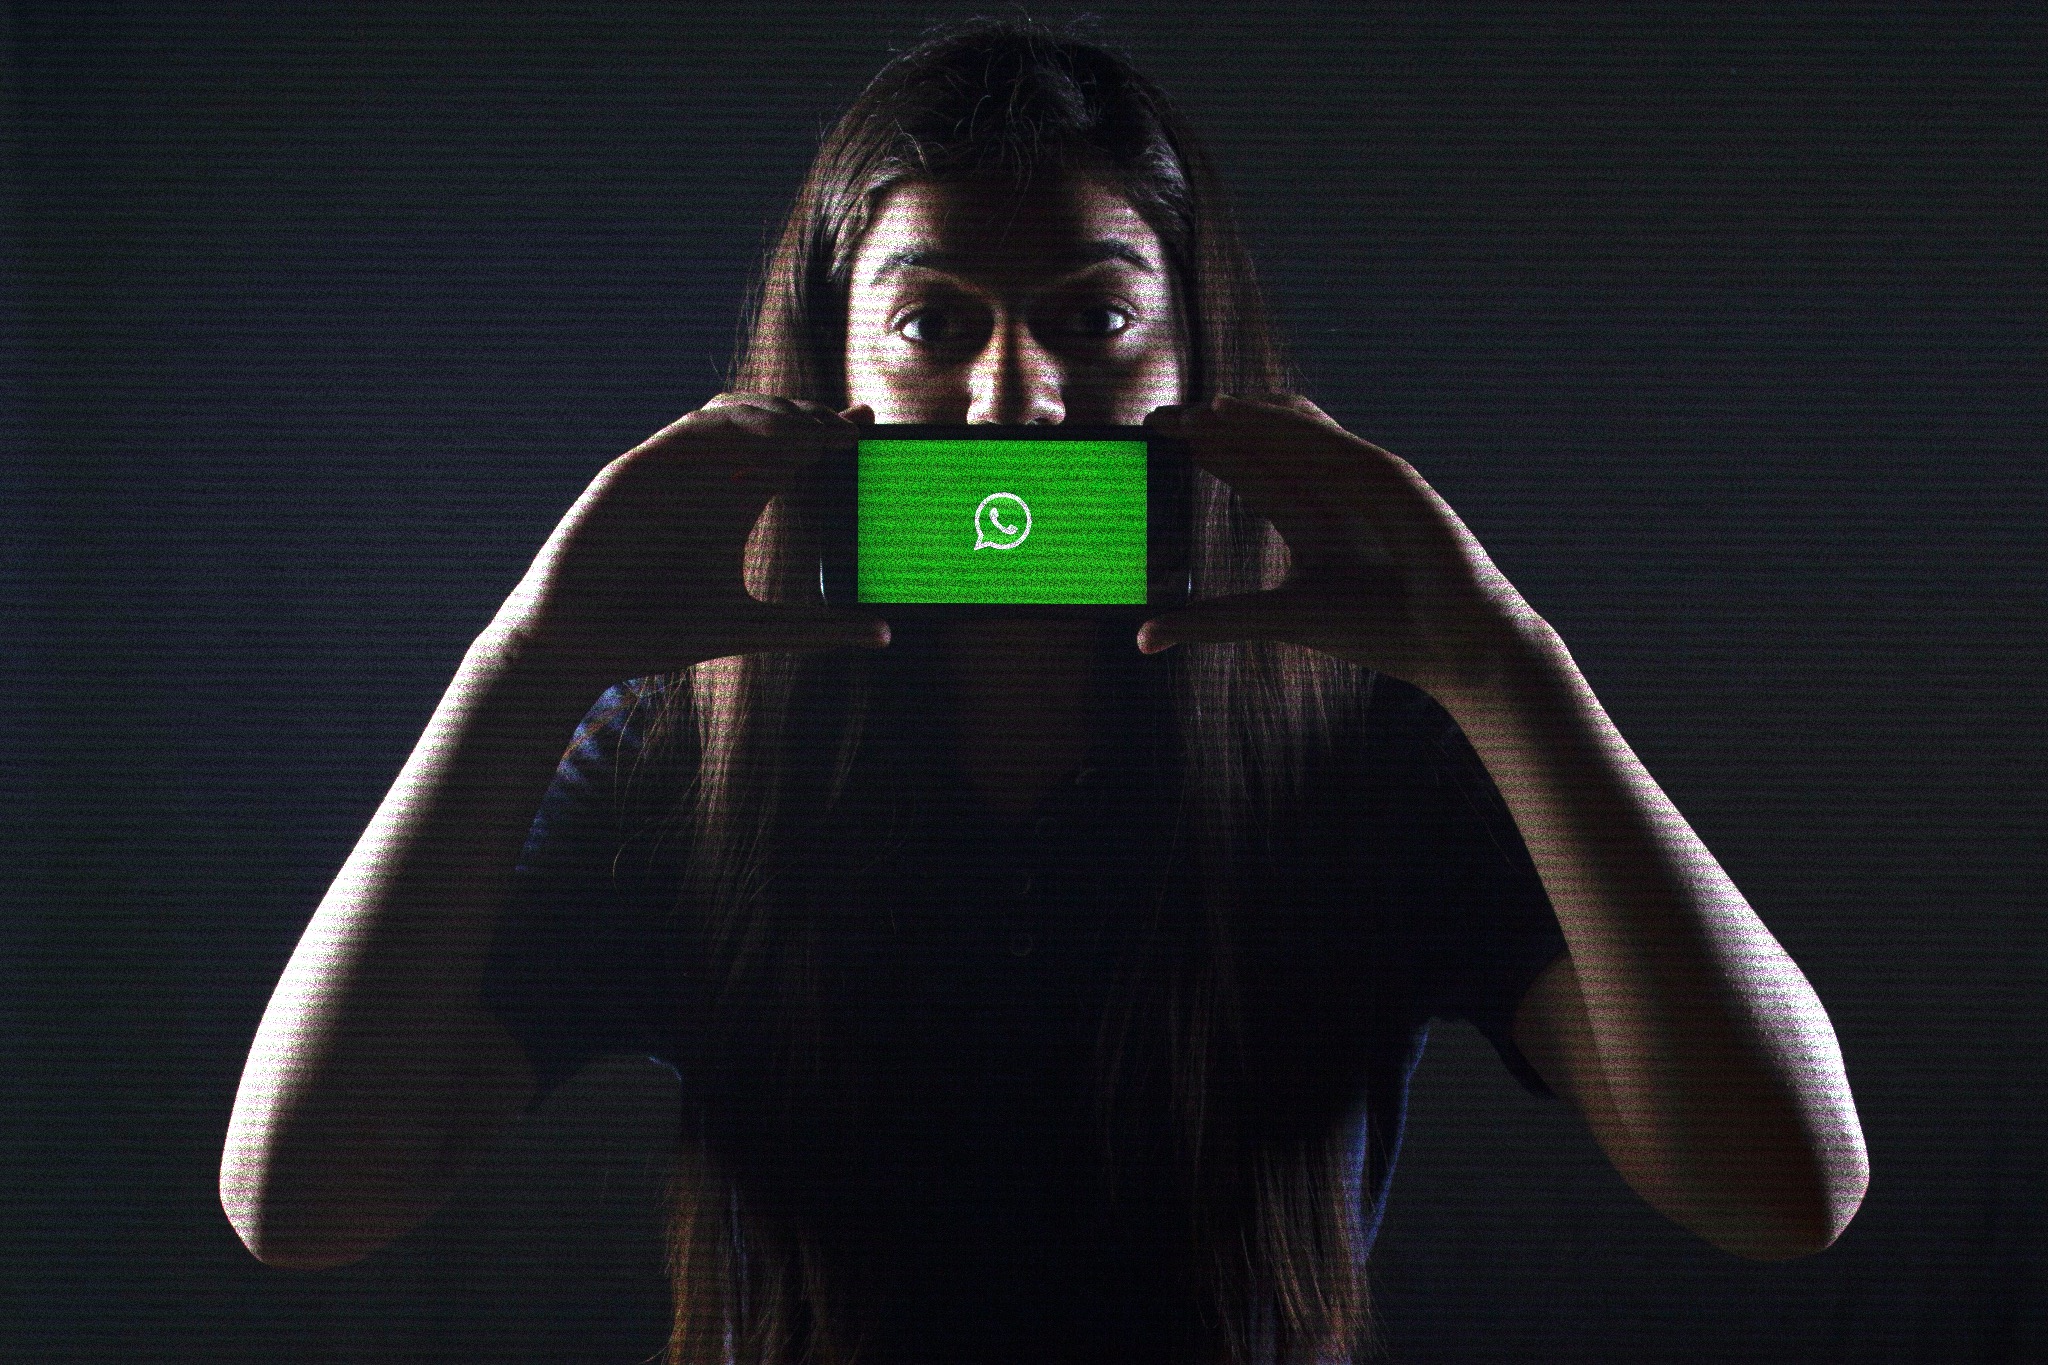 WhatsApp bug allows complete control of group chats, crashing the app